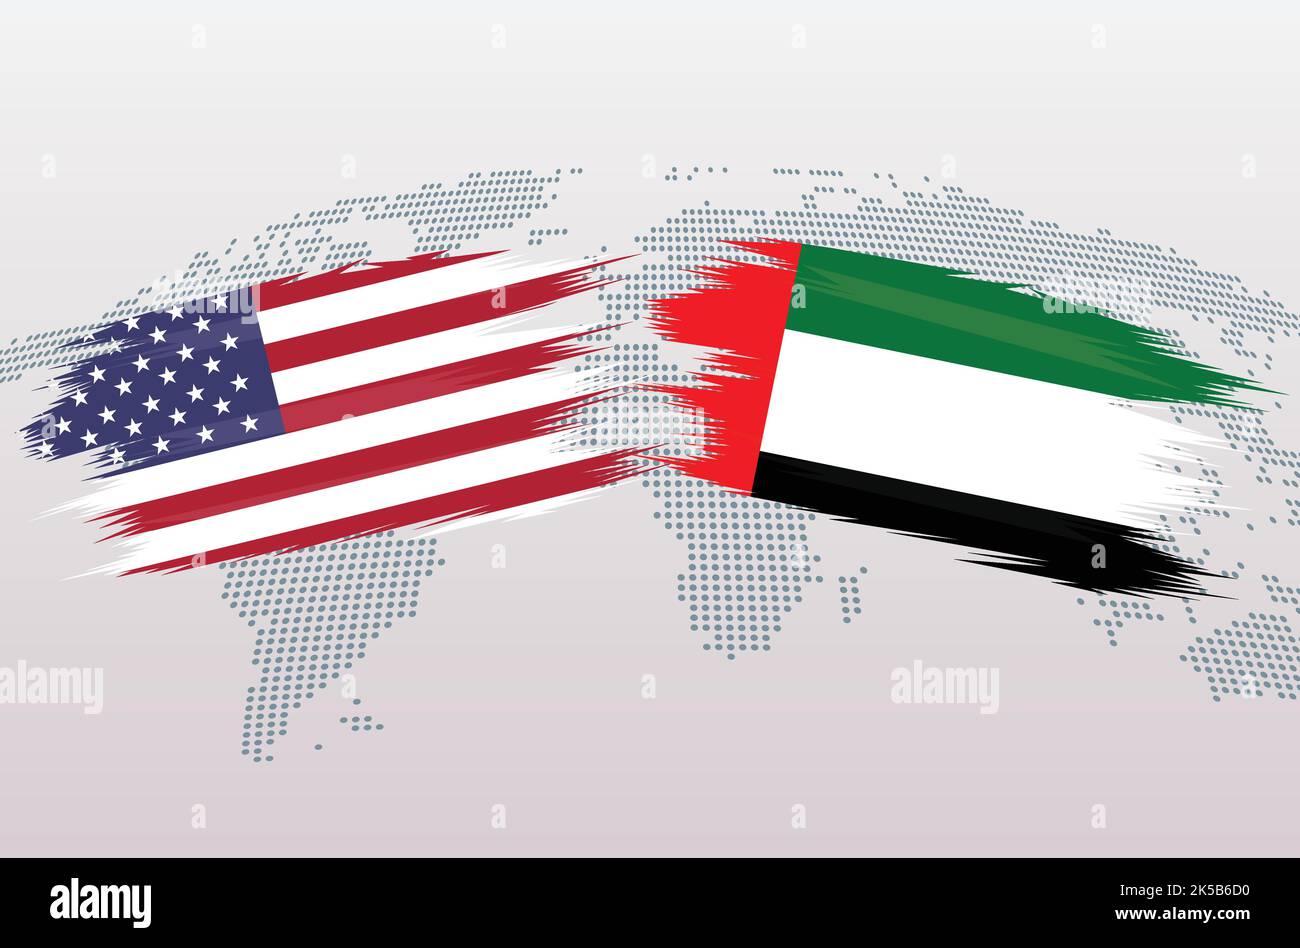 USA VS UAE flags. The United States of America VS United Arab Emirates flags, isolated on grey world map background. Vector illustration. Stock Vector